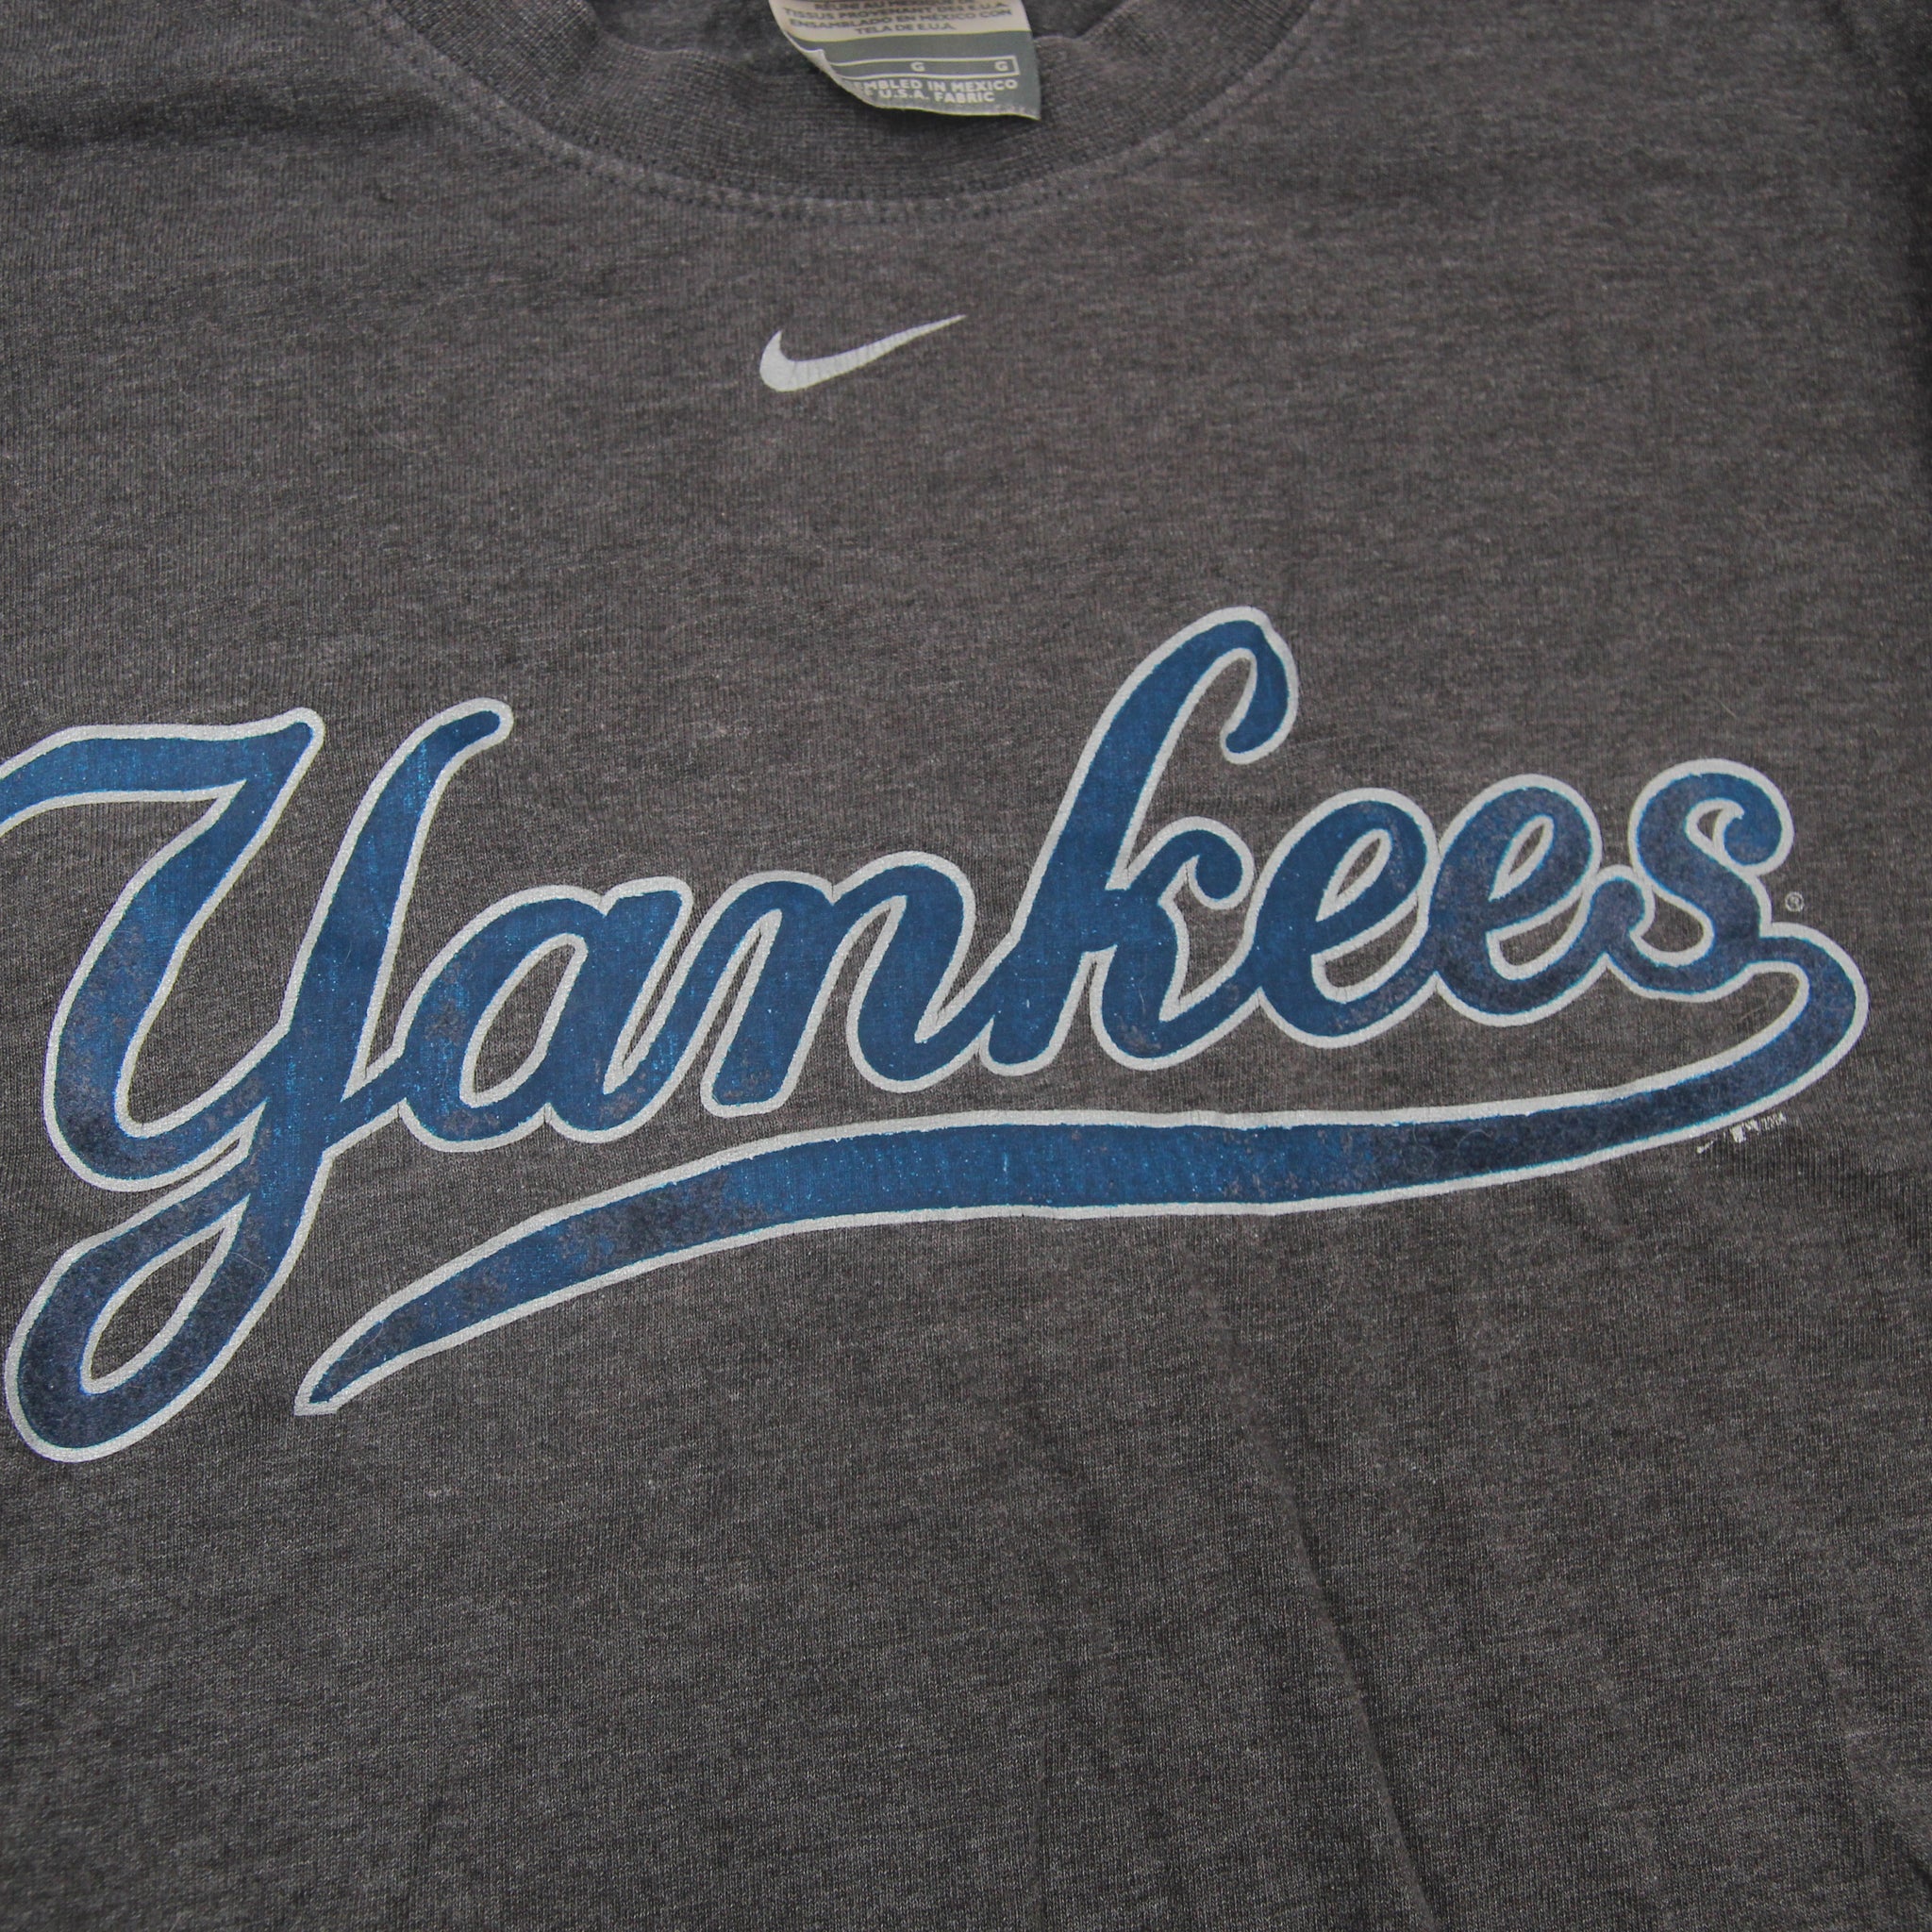 Vintage New York Yankees Practice Jersey Size 2X-Large